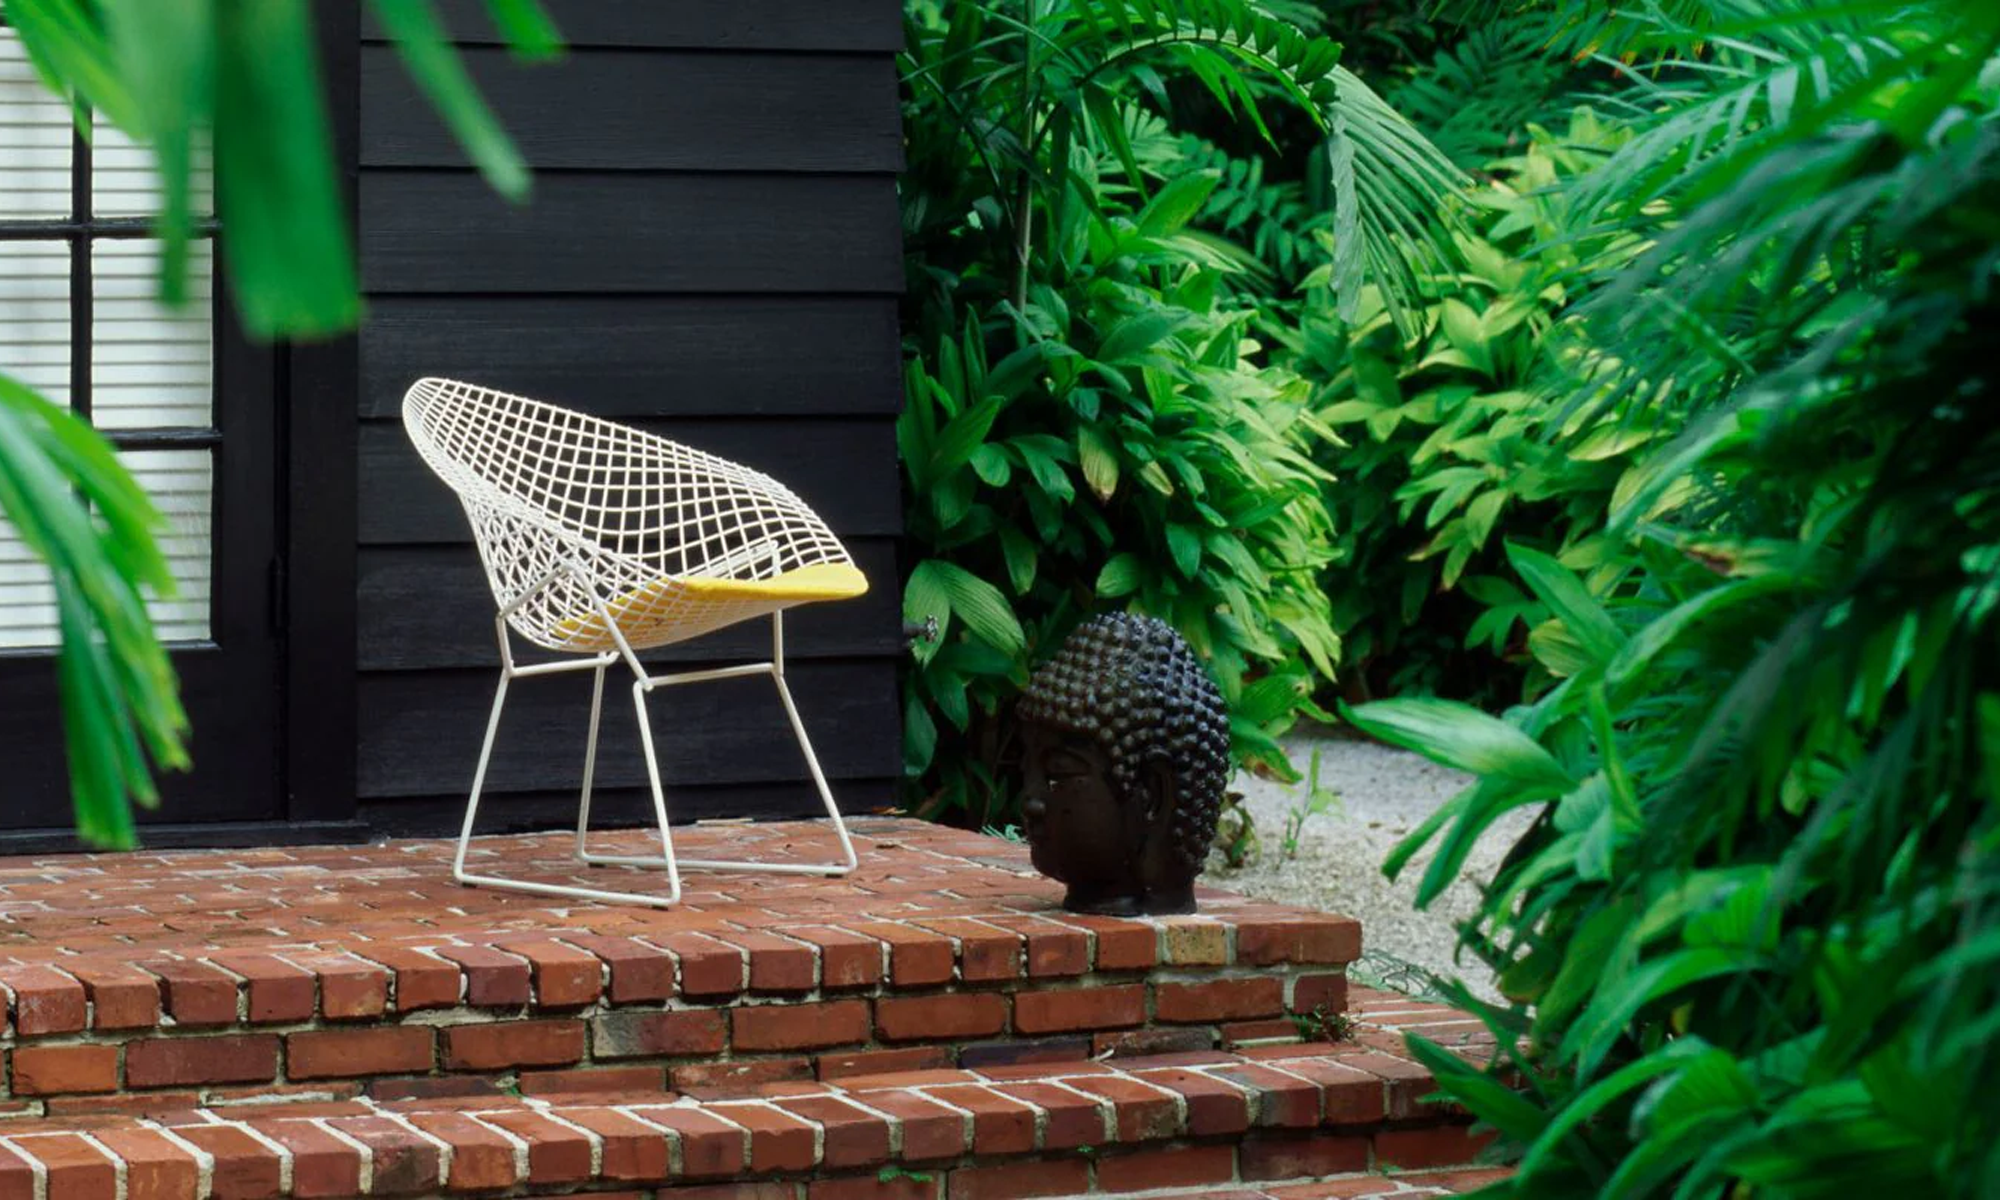 Necessity was the mother of invention for the godfather of modern outdoor furniture, Richard Schultz.